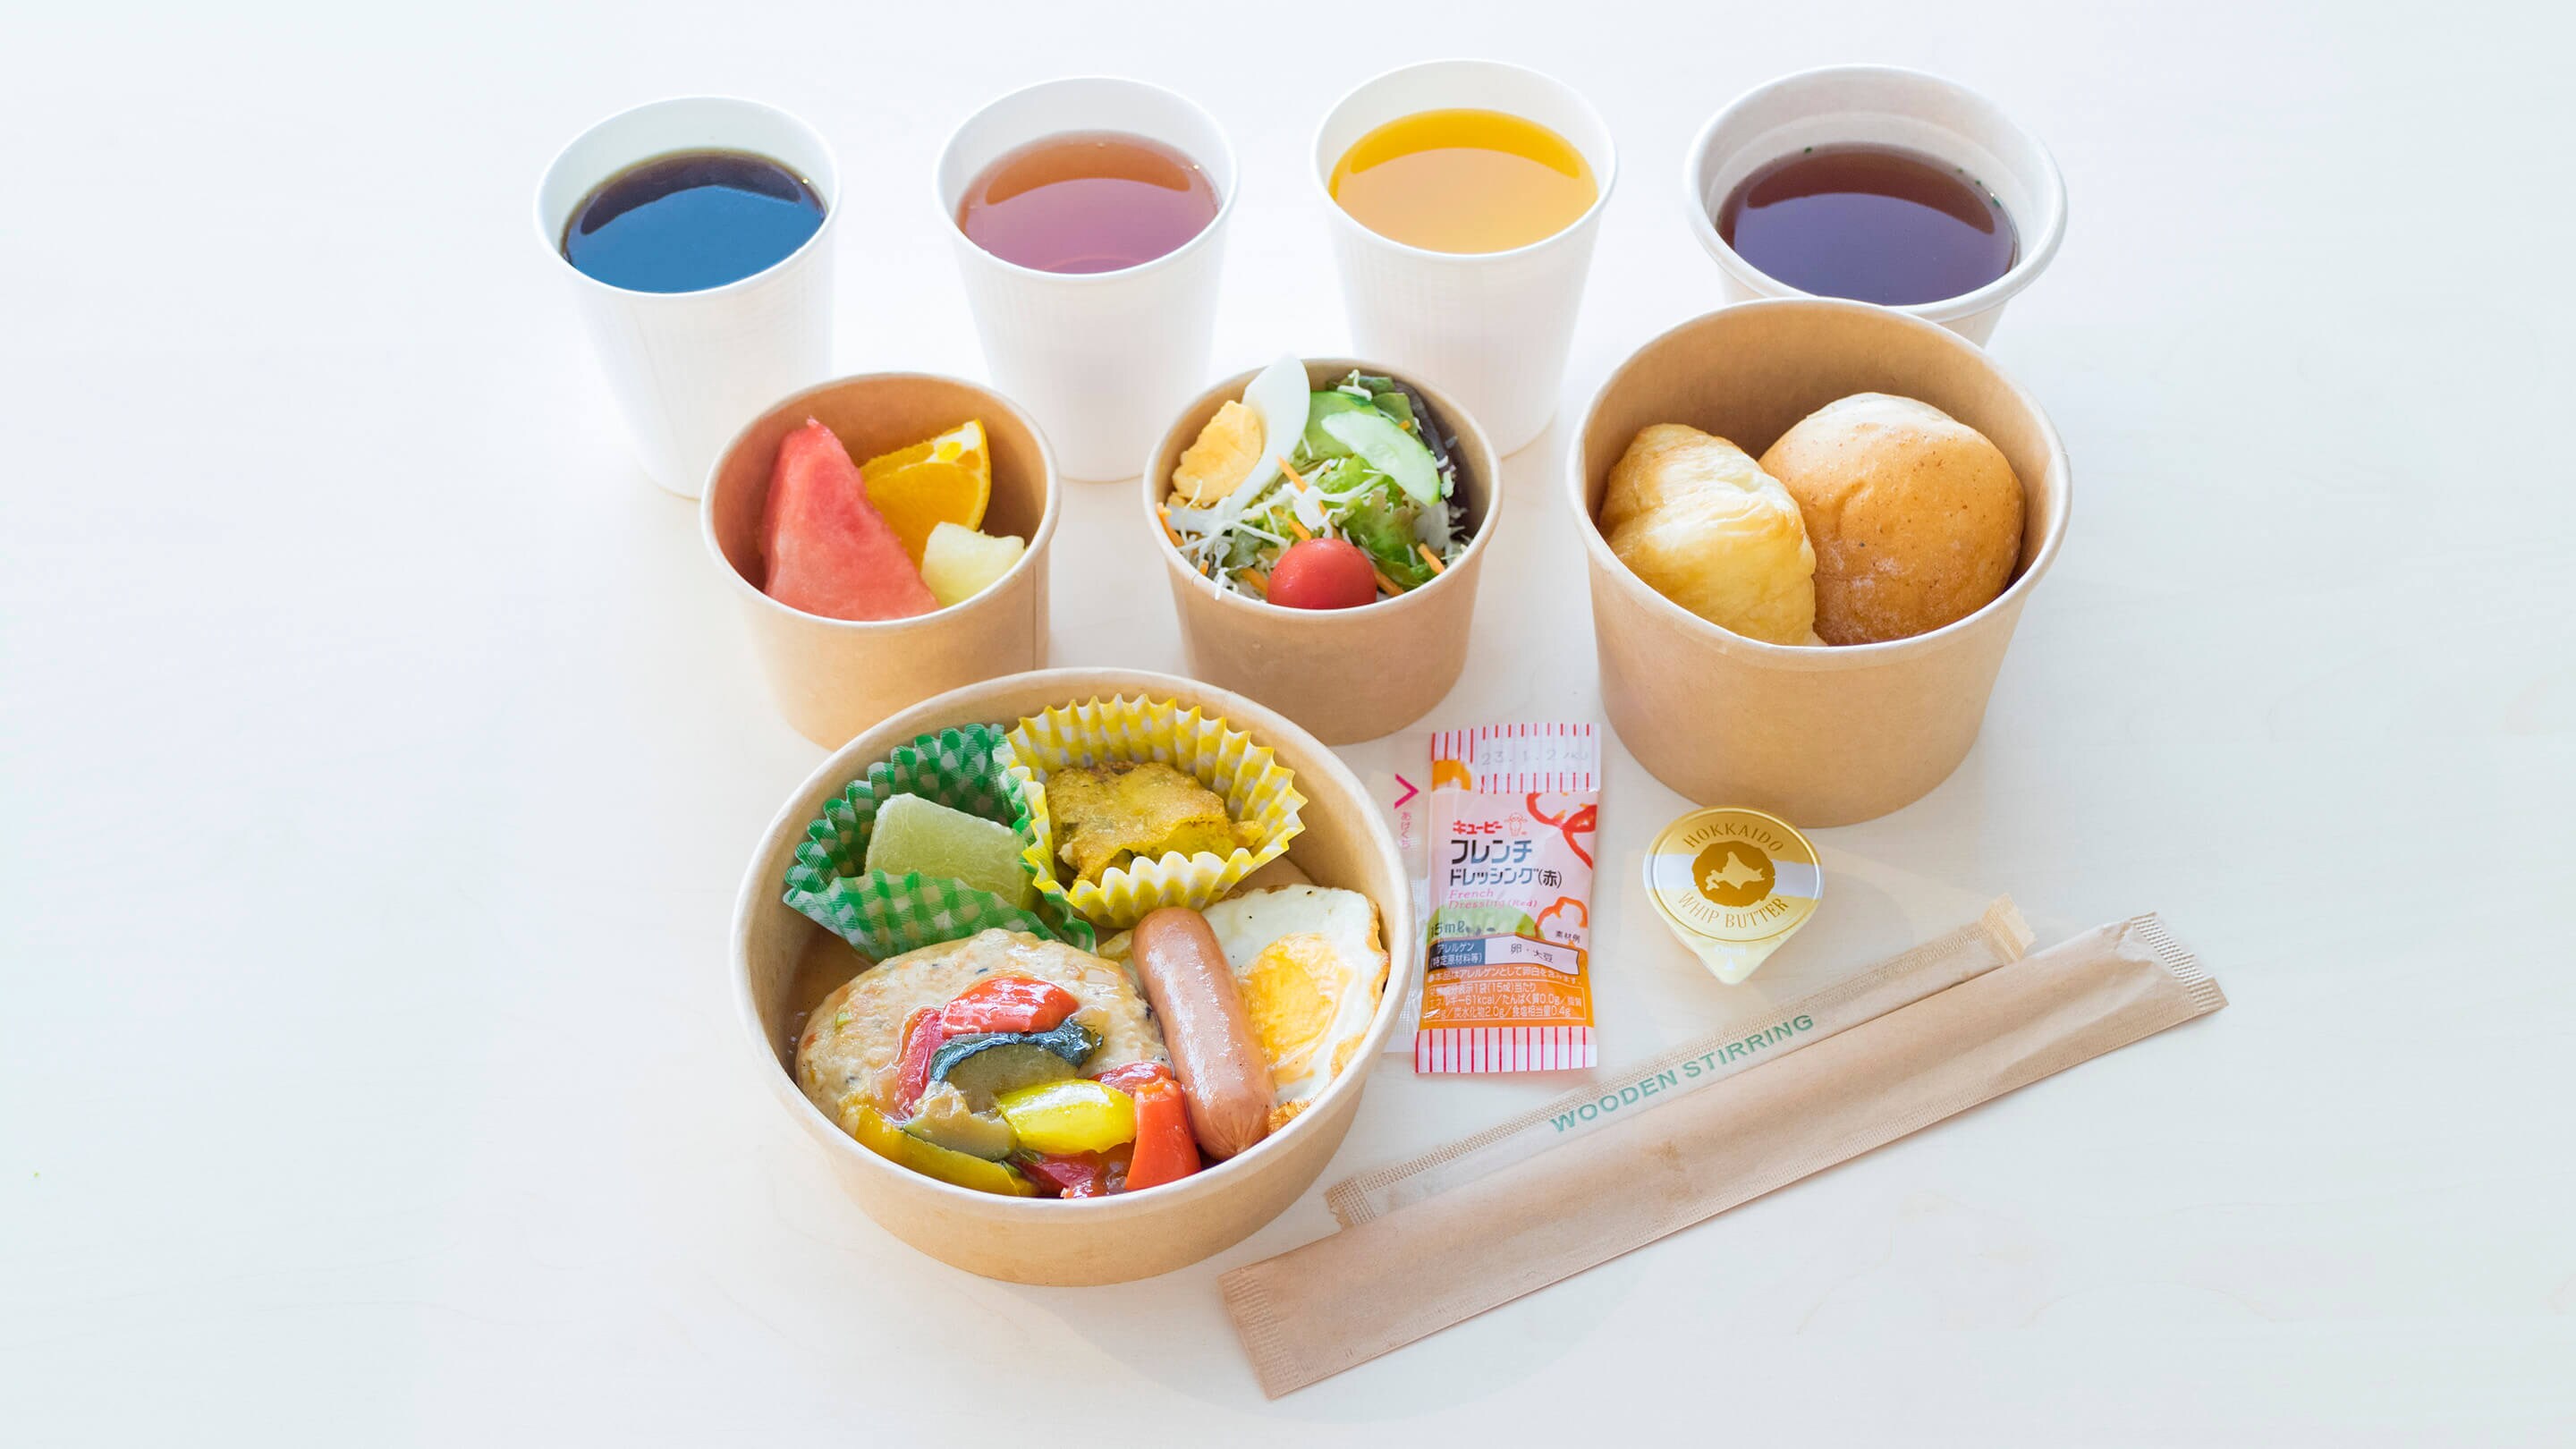 Breakfast in your room (takeout style bento box)